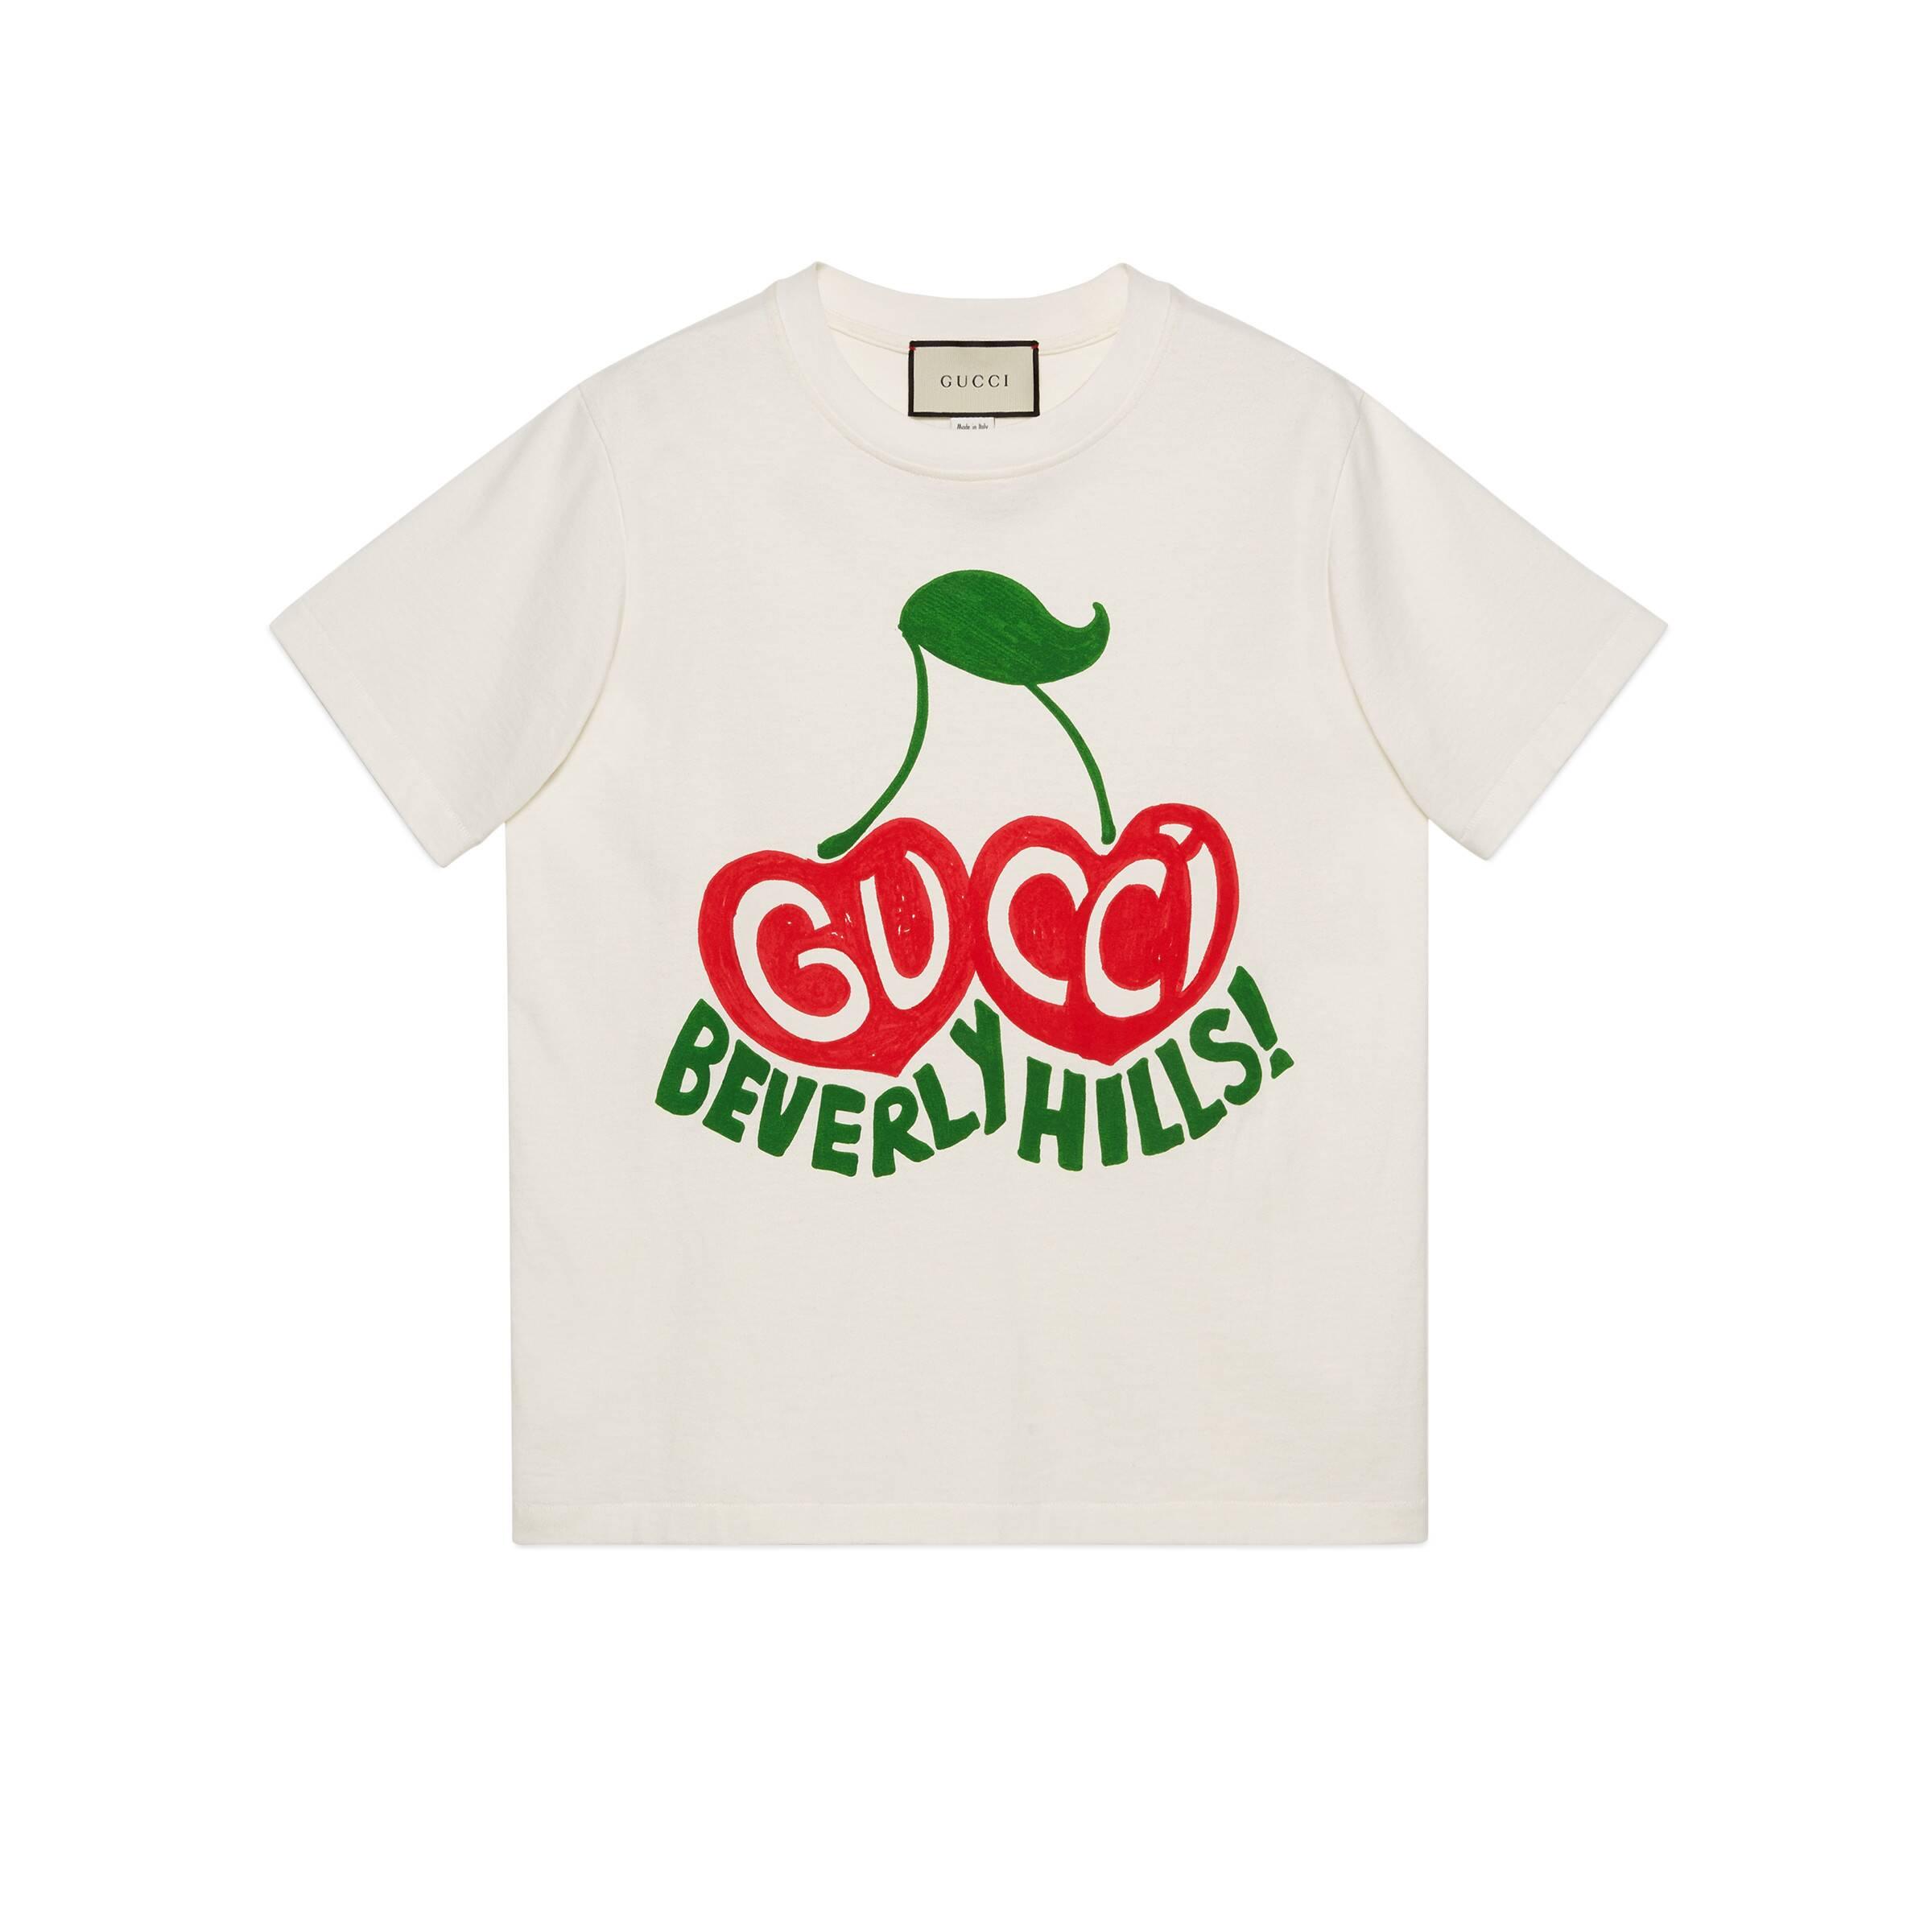 Gucci "beverly Hills" Cherry Print T-shirt in White | Lyst